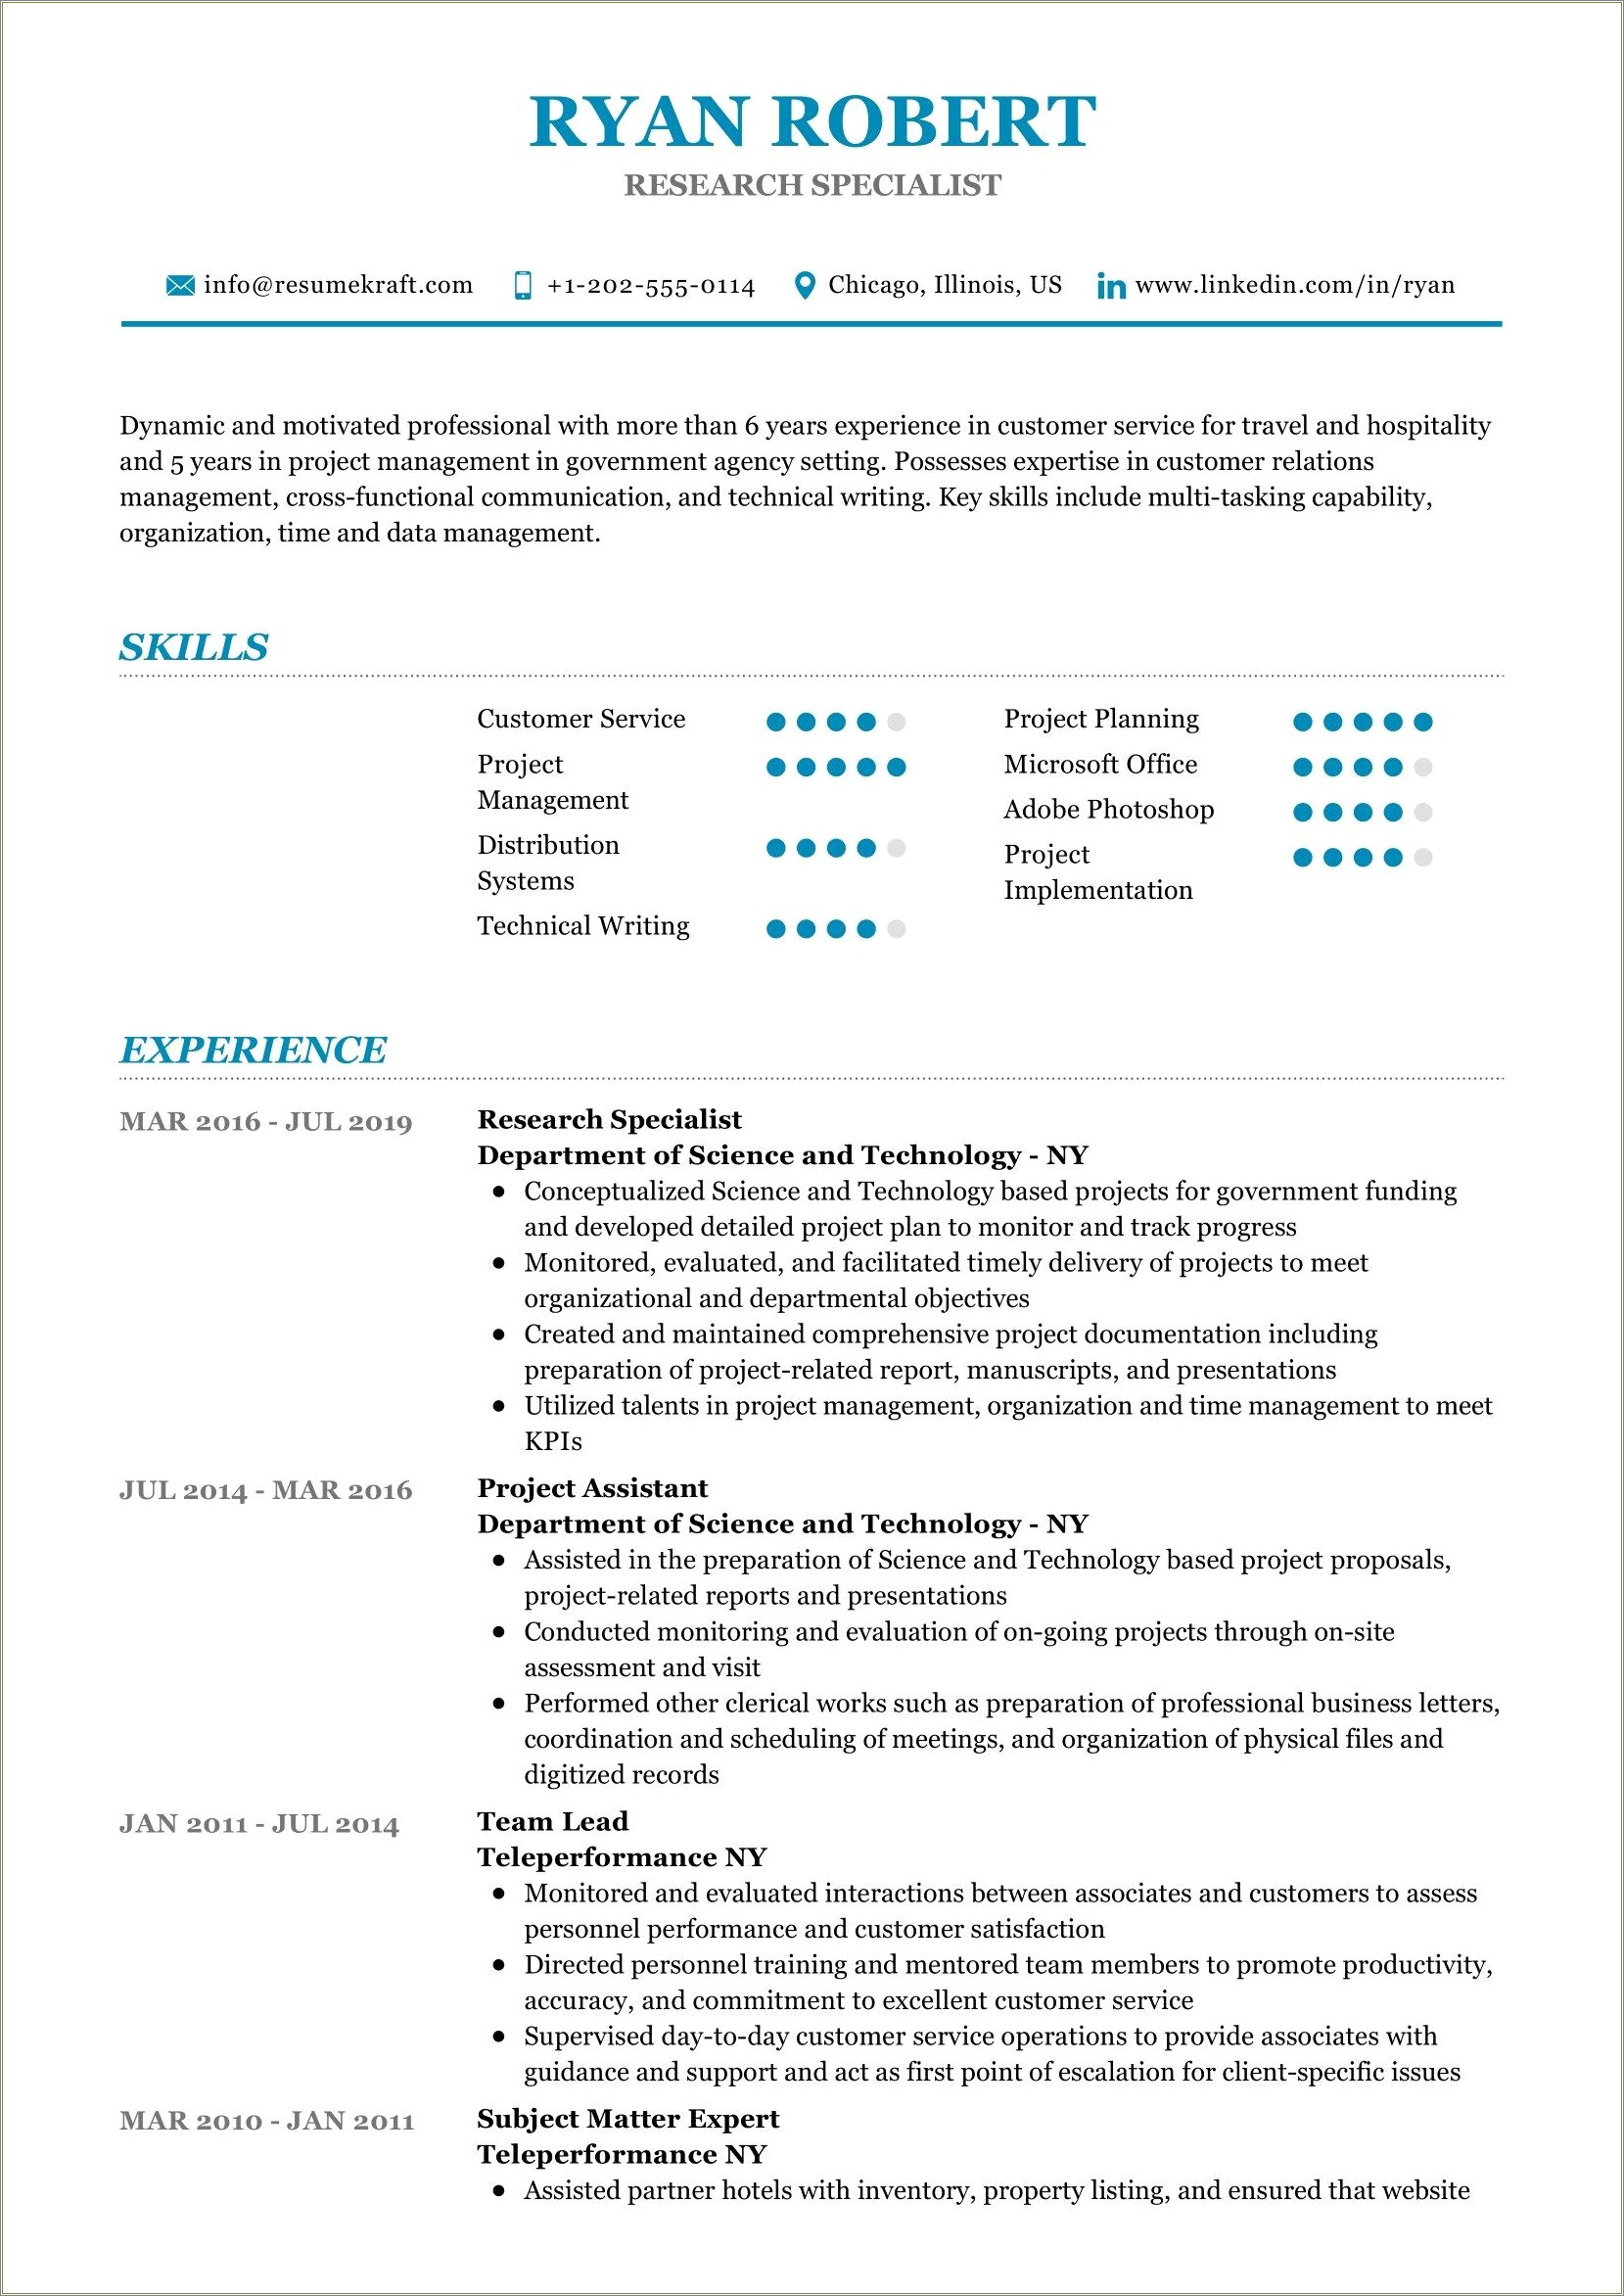 Intelligence Research Specialist Qualifications And Skills Summary Resume